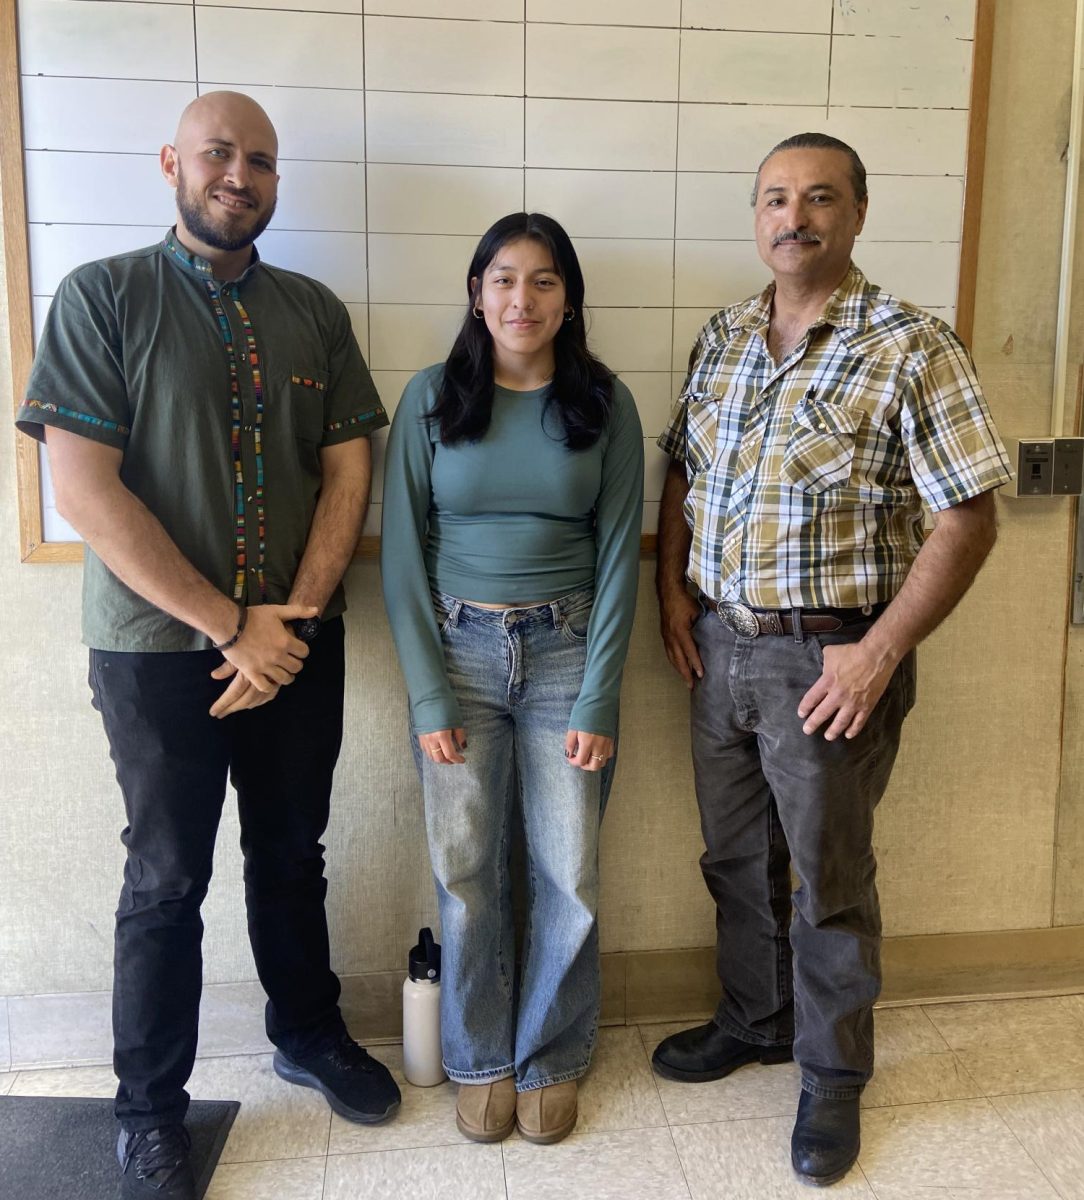 For the second year in a row, an Alisal student is once again a Gates scholar. Senior Joselin Hernandez was awarded the Gates Scholarship. Both Pedro Mendoza and Juan Jose Trujillo wrote letters of recommendation. “Mendoza and Trujillo are an inspiration because of what they have been able to accomplish,” Hernanez said.